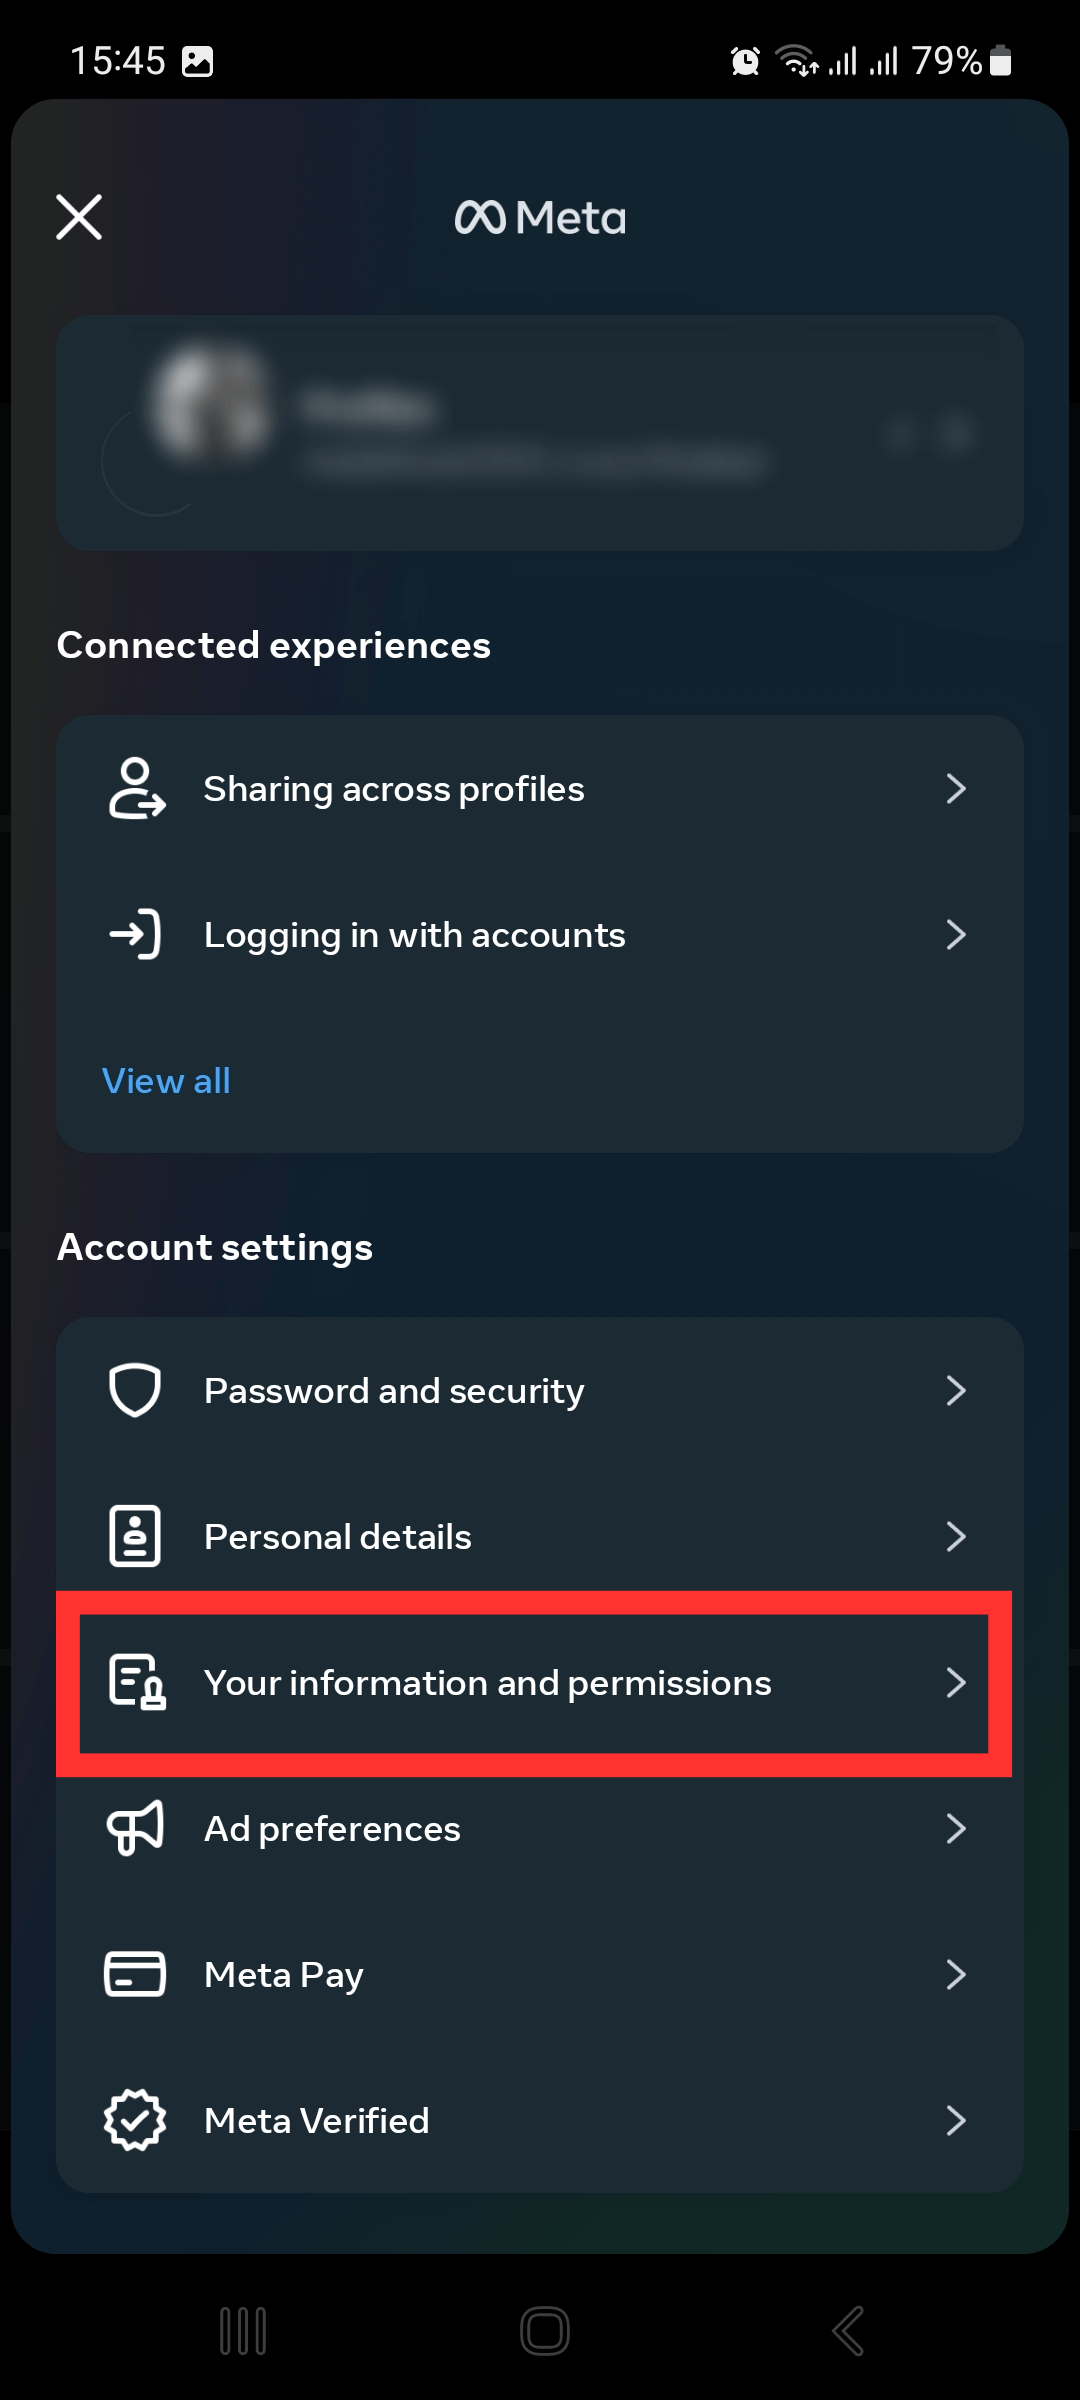 Your-information-and-permissions